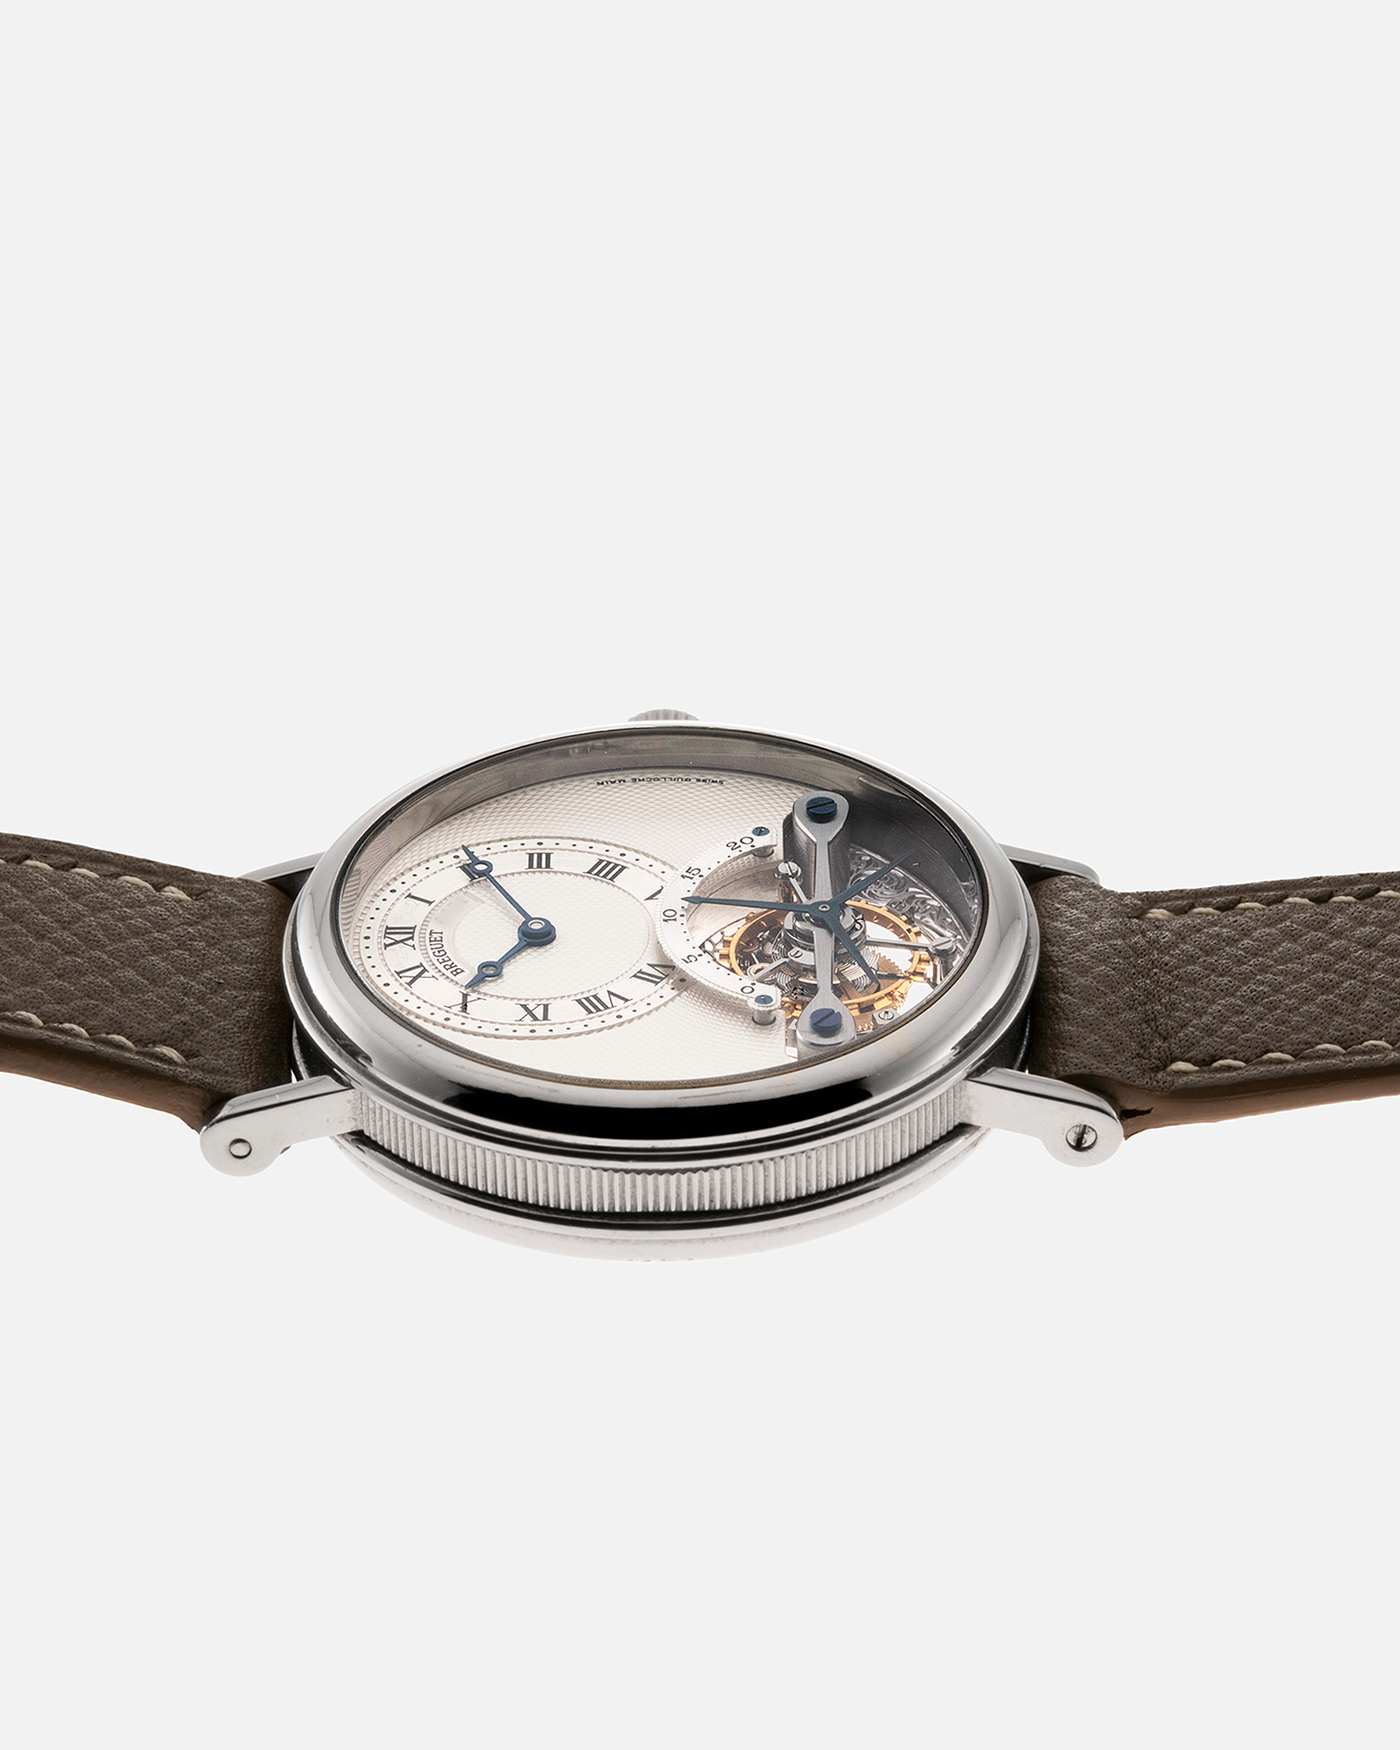 Brand: Breguet Year: 1990’s Model: Classique Tourbillon Reference: 3357 Material: 18-carat White Gold Movement: Breguet Cal. 558, Self-Winding Case Diameter: 36mm Strap: Taupe Calf Grained Strap with Signed 18-carat White Gold Deployant Clasp